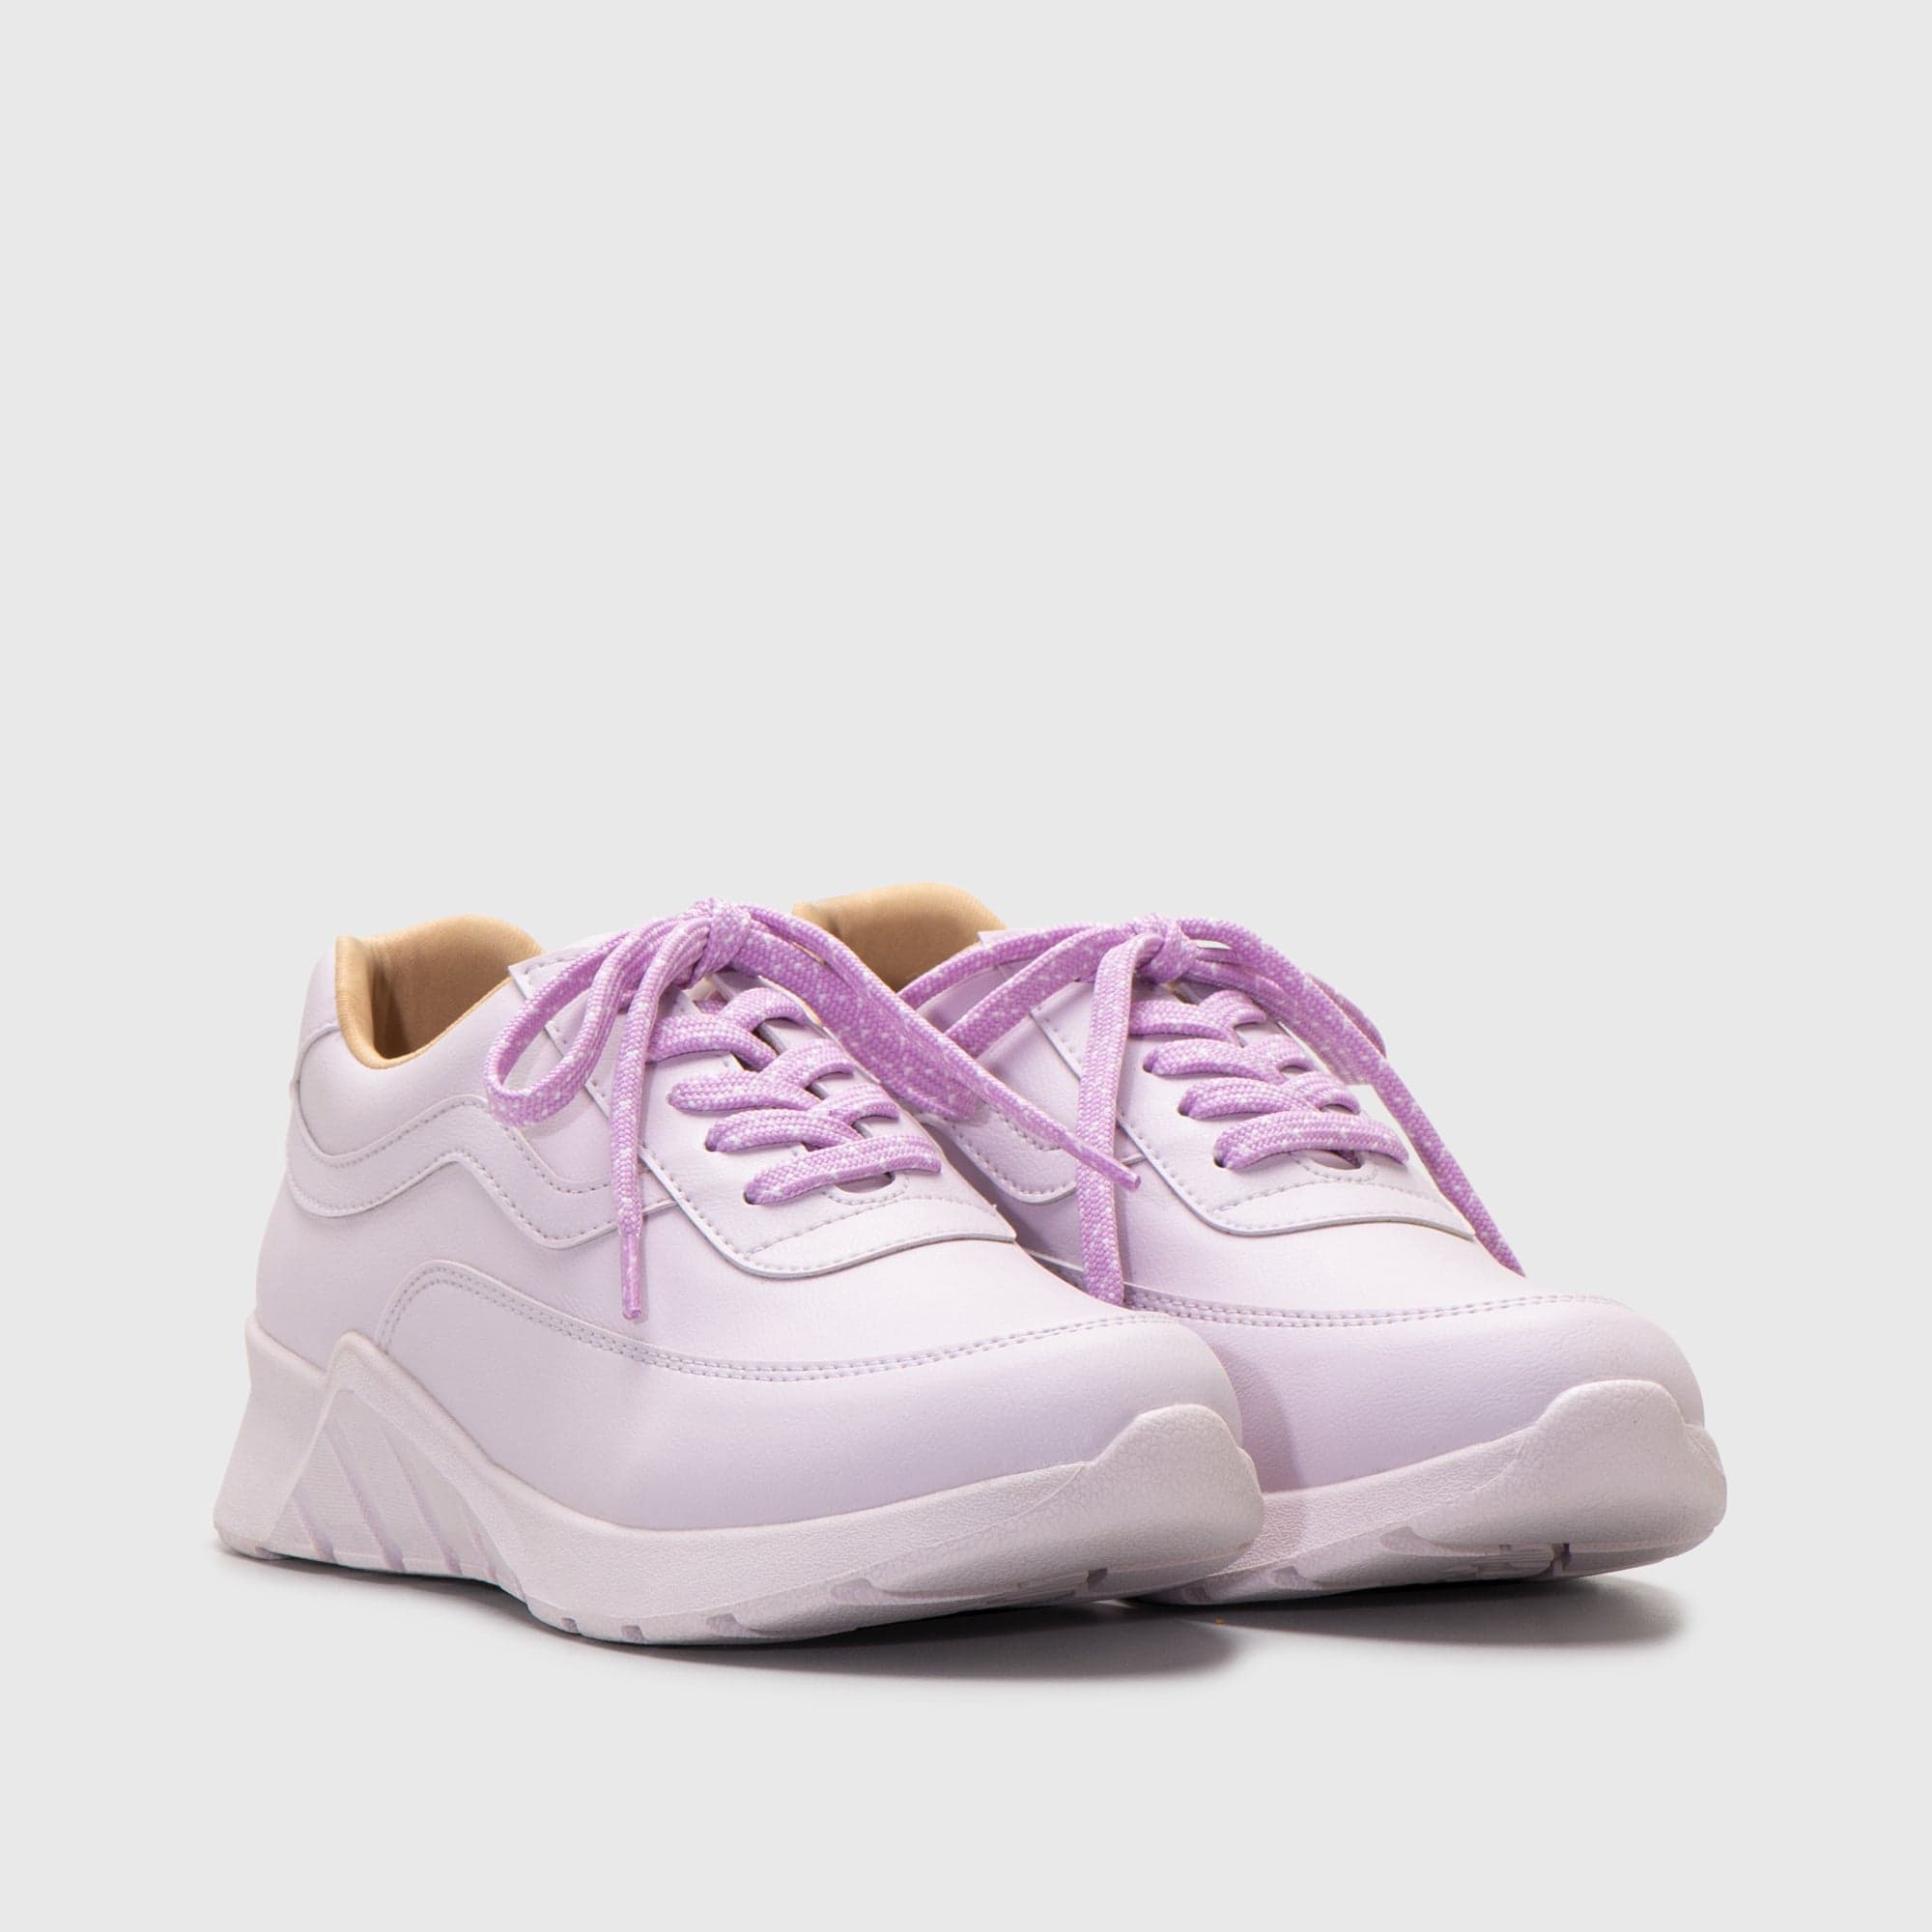 Adorable Projects Official Sneakers Kikimora Sneakers Purple